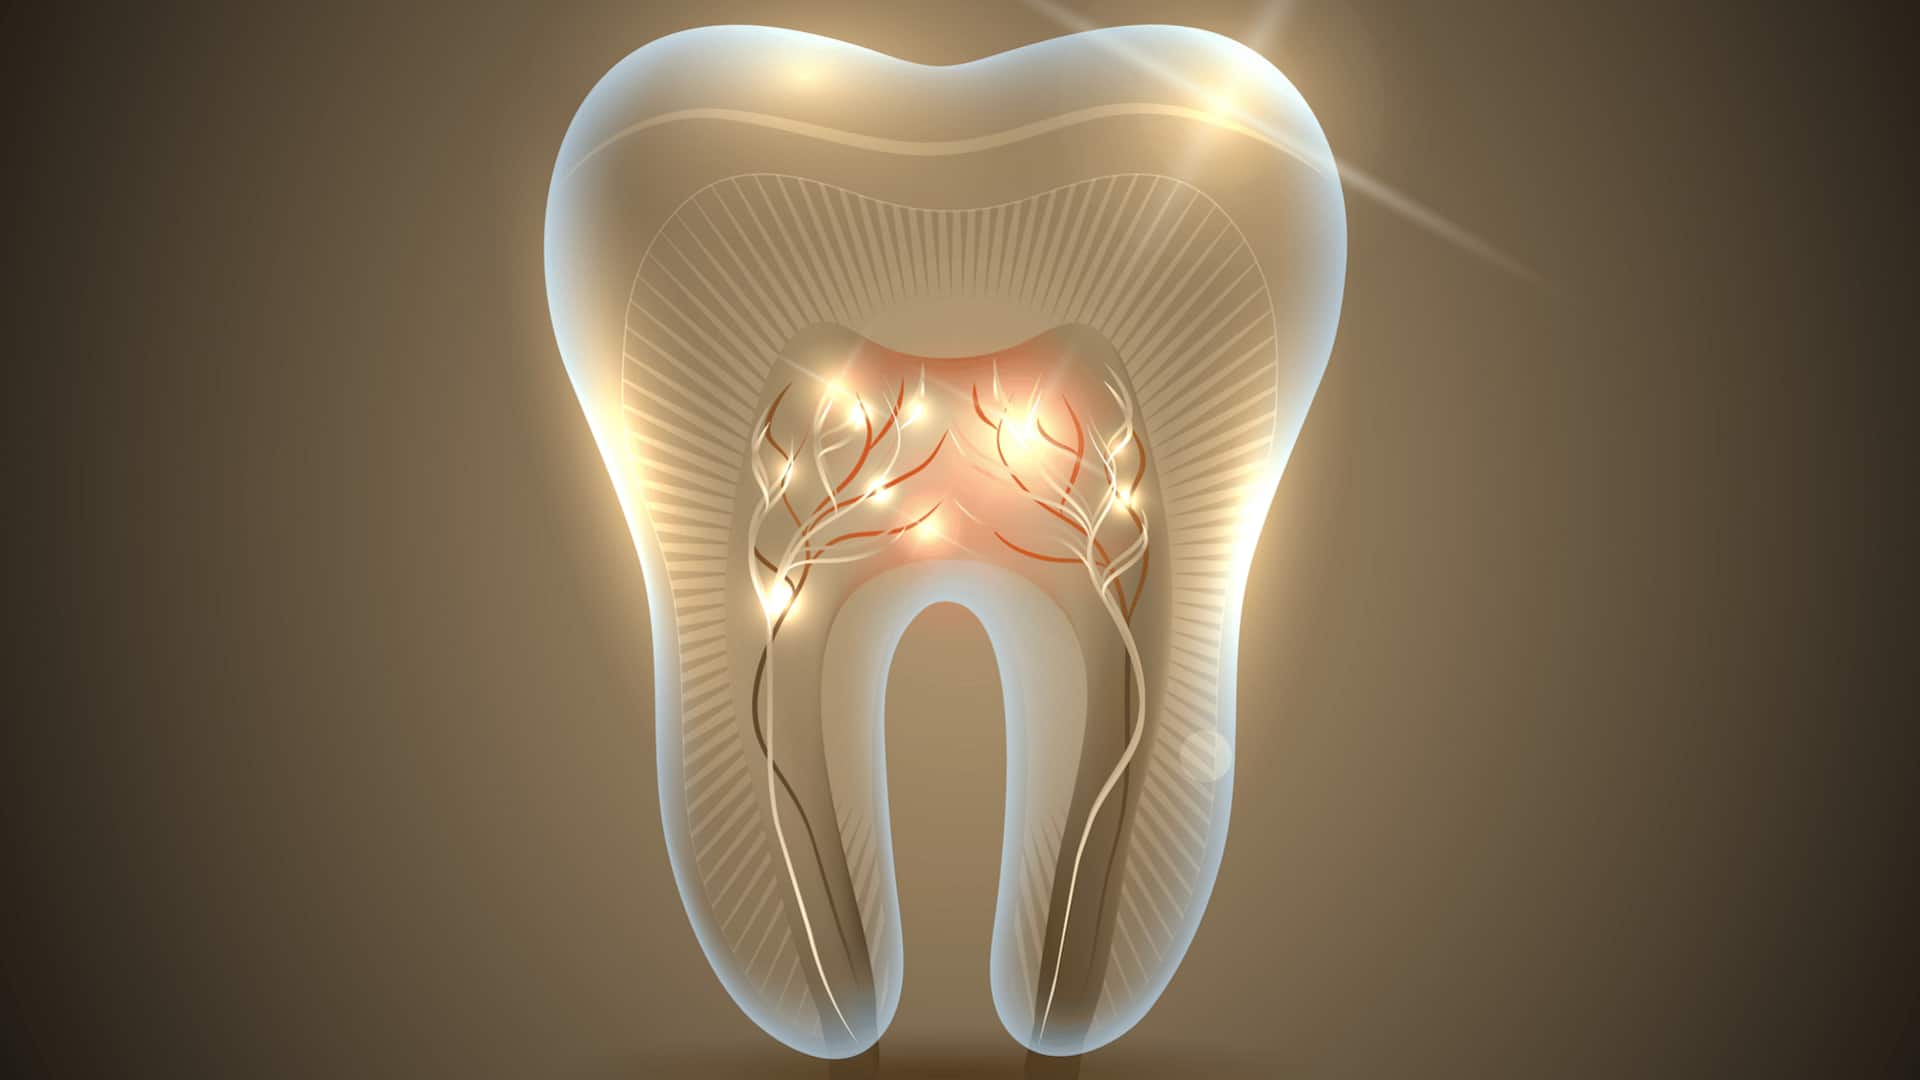 World's first tooth-regrowing drug approved for human trials